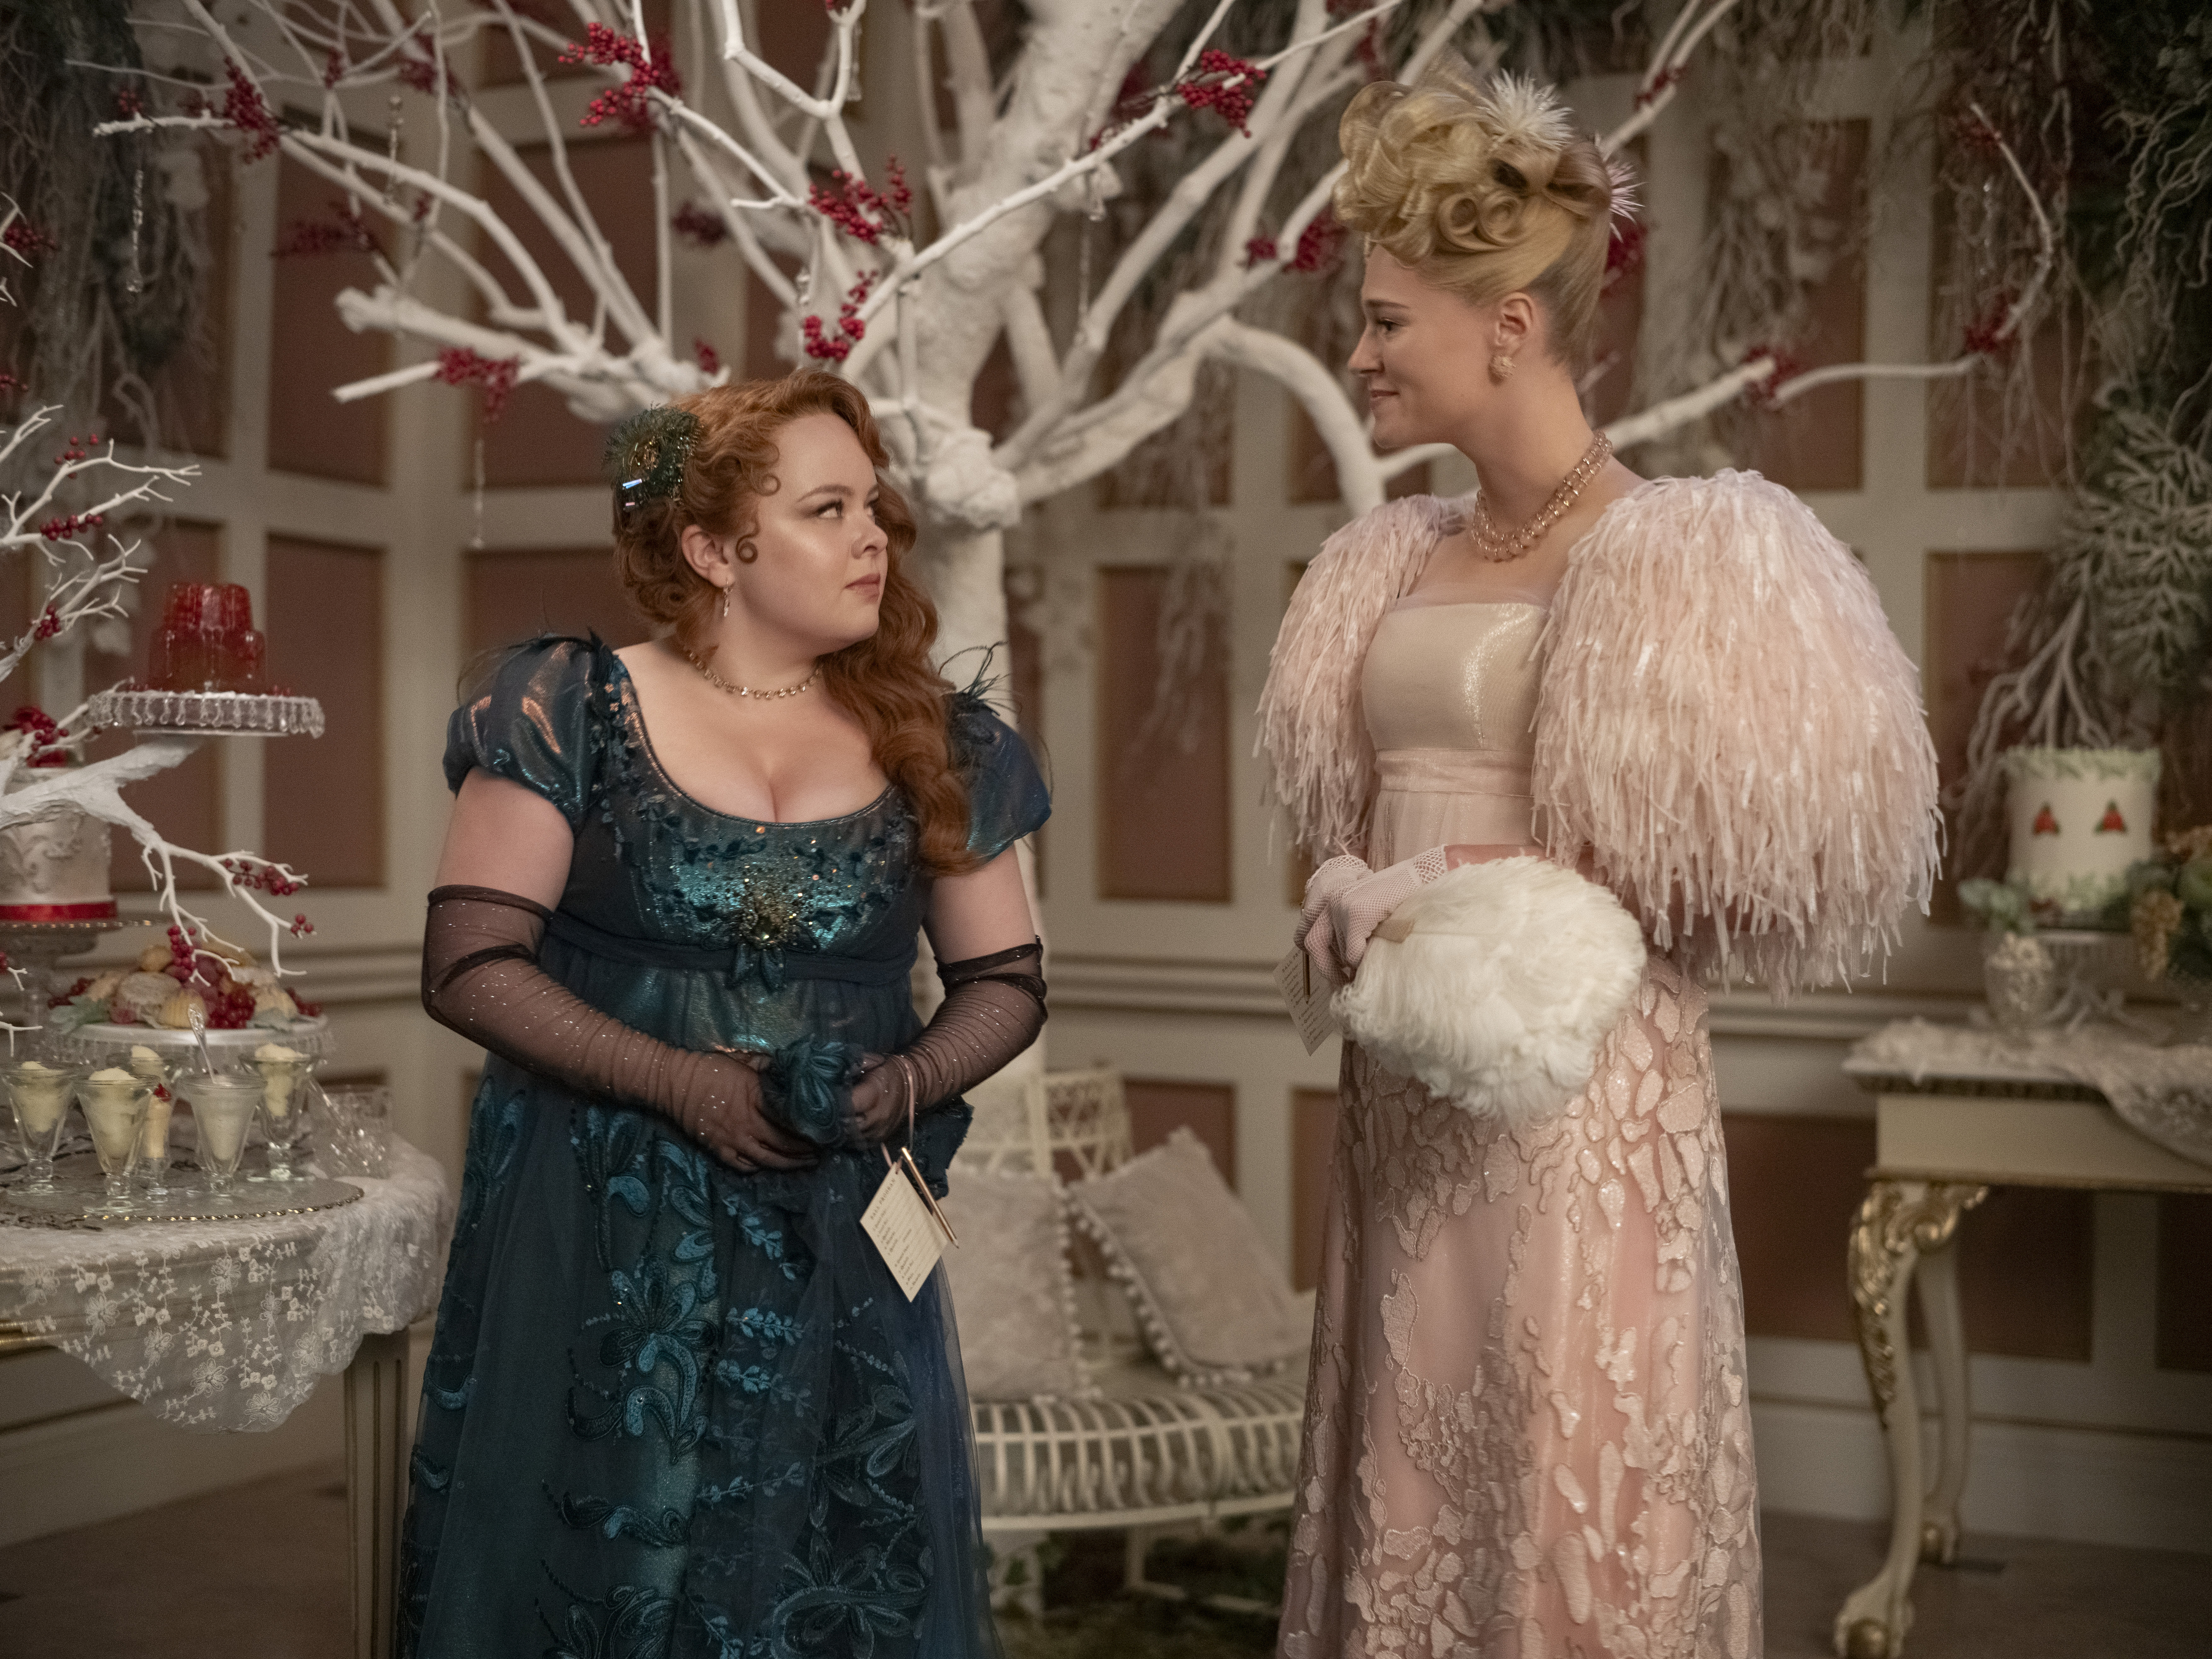 <p>Nicola Coughlan plays Penelope Featherington and Jessica Madsen plays judgy and sometimes cruel Cressida Cowper in episode 1, season 3 of "Bridgerton," which debuts on Netflix on May 16, 2024.</p><p>"I love a mean-girl character, but even more, I love understanding <em>why</em> a mean girl is a mean girl. Because mean girls are not born, they're made," season 3 showrunner Jess Brownell told Vanity Fair, teasing that more of Cressida's story will be revealed this season. "You have Cressida, who has been this queen bee all along — but three years in without a husband, I think there's some room for reflection with her. You're going to see some new sides from her this year, and understand why she is the way she is."</p><p>MORE: <a href="https://www.wonderwall.com/style/fashion/best-period-costumes-all-time-tv-movies-3011841.gallery">Best period costumes of all time</a></p>